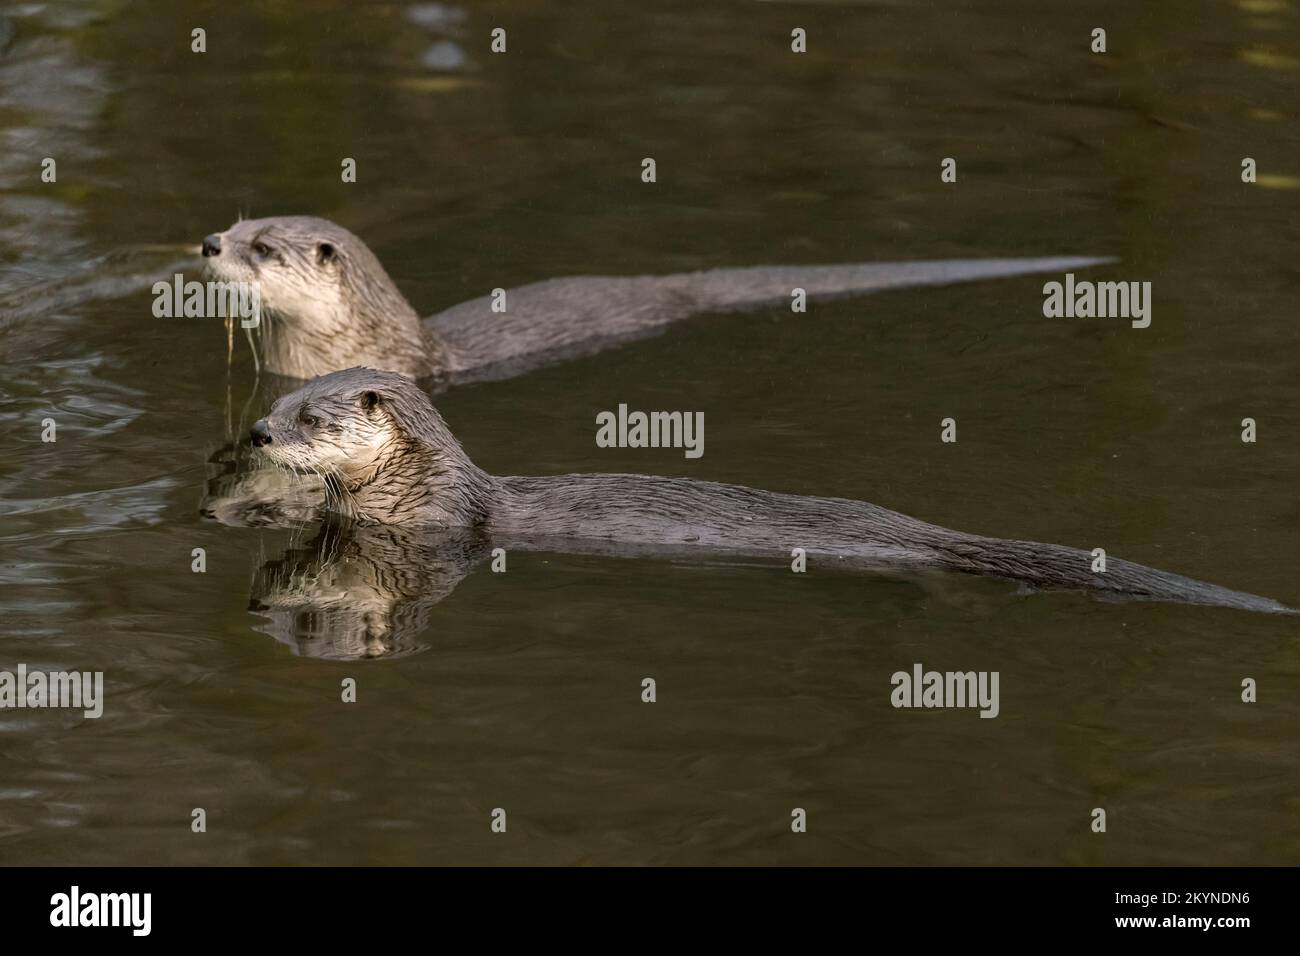 Eurasian otter / two European river otters (Lutra lutra) pair swimming in pond in the rain Stock Photo